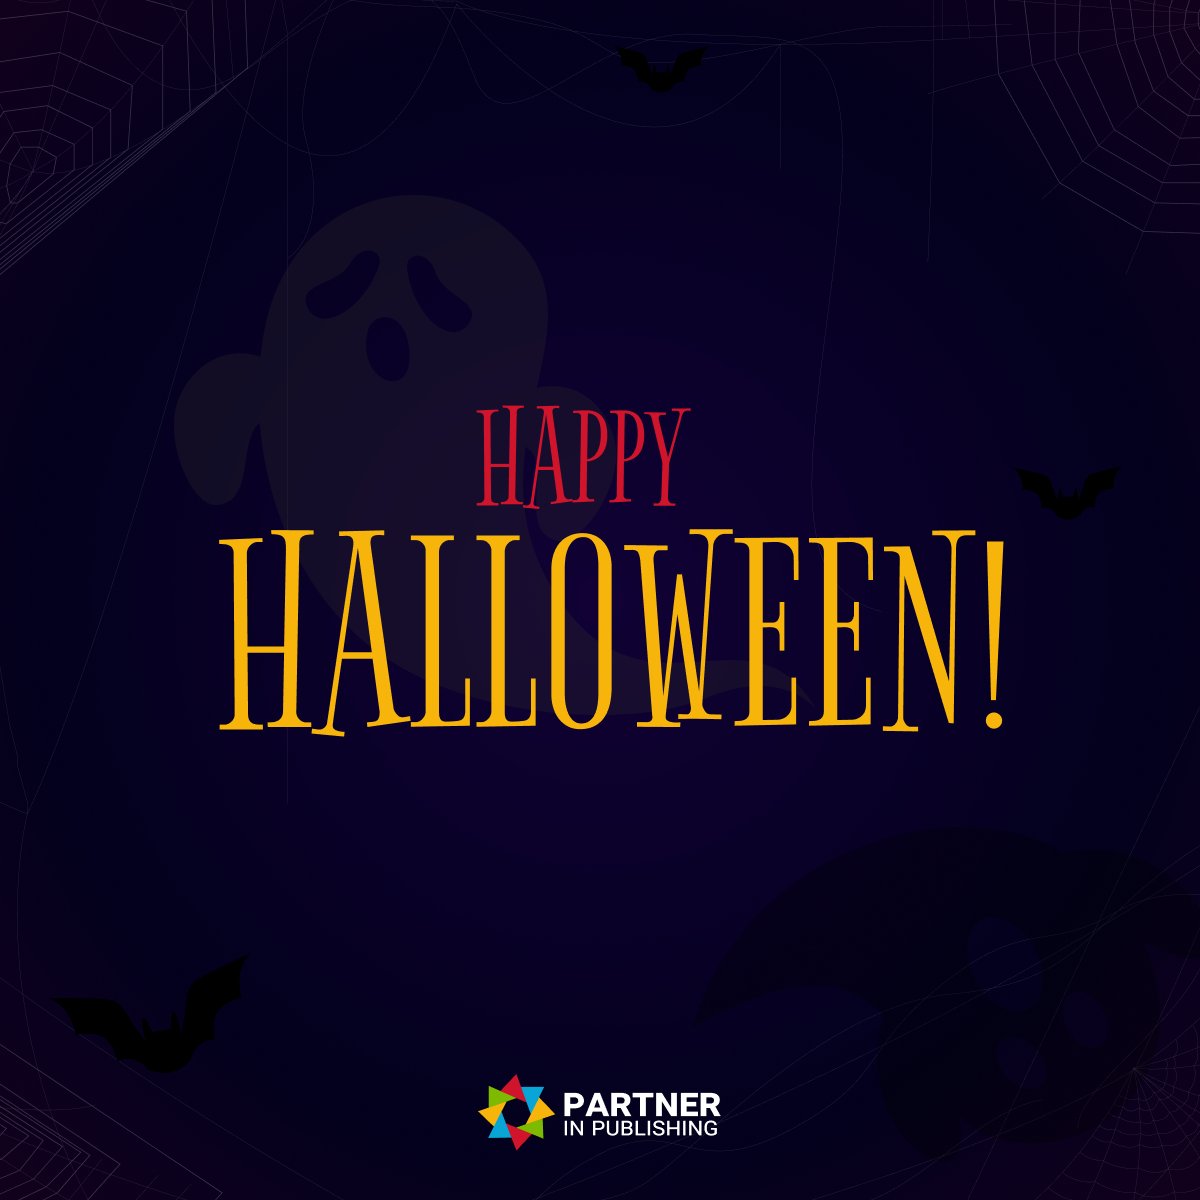 Happy Halloween! 🎃👻

You know what can be truly terrifying? Navigating the #EdTech space without a well-defined market research and development strategy.

But fear not, we are here to help squash those fears and guide you towards success.

#MarketResearch #MarketDevelopment